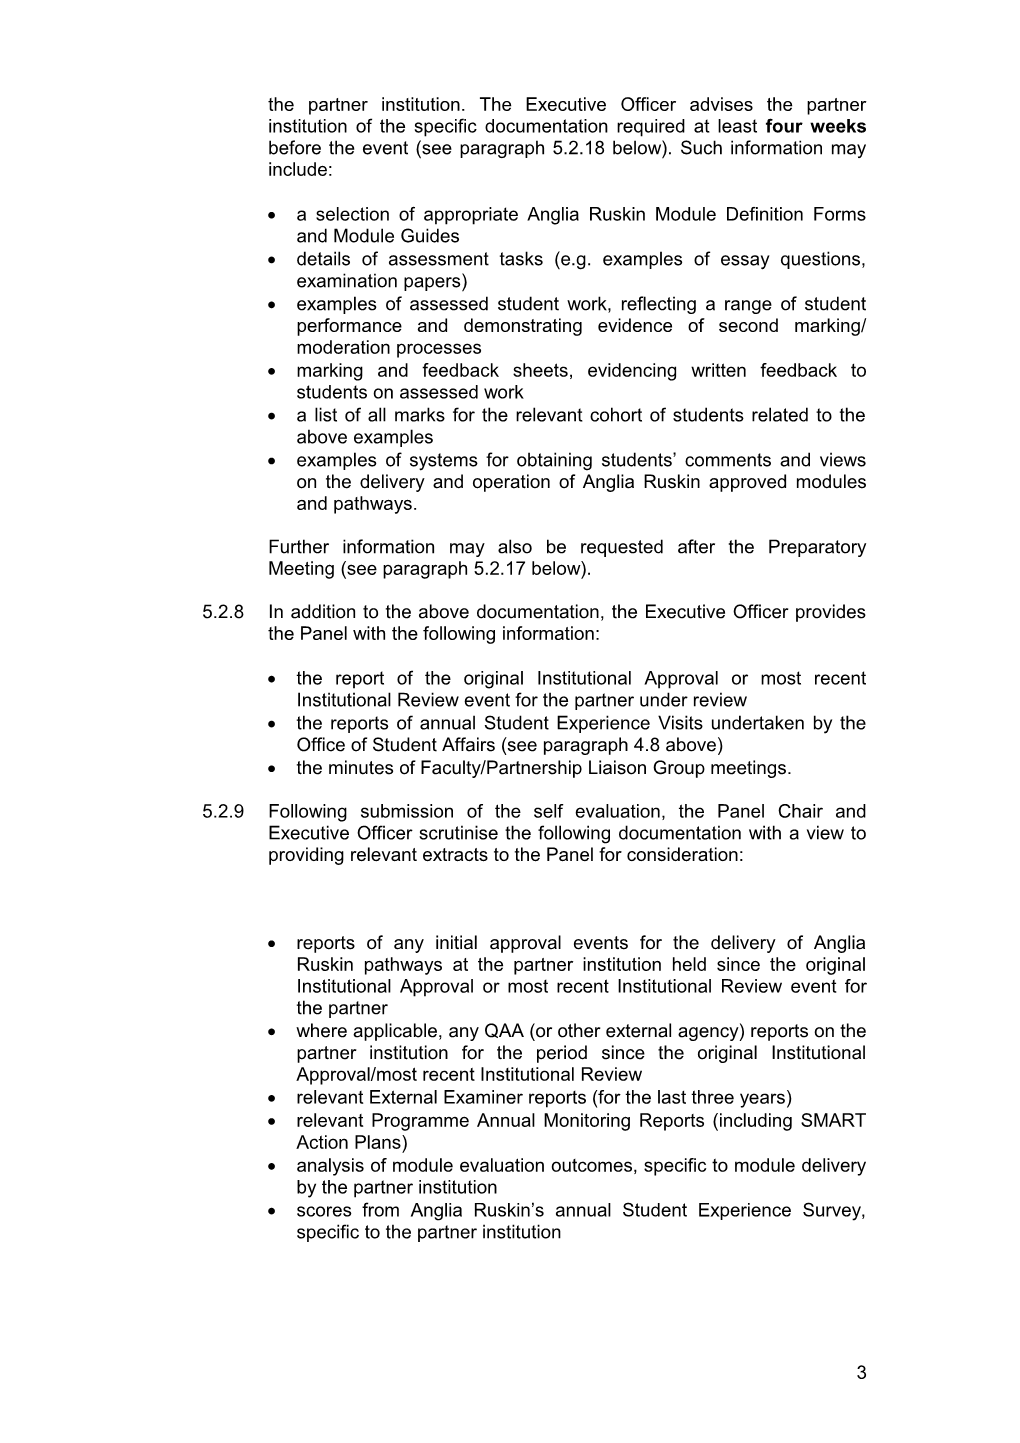 Extract from Senate Code of Practice on Collaborative Provision: Procedural Document